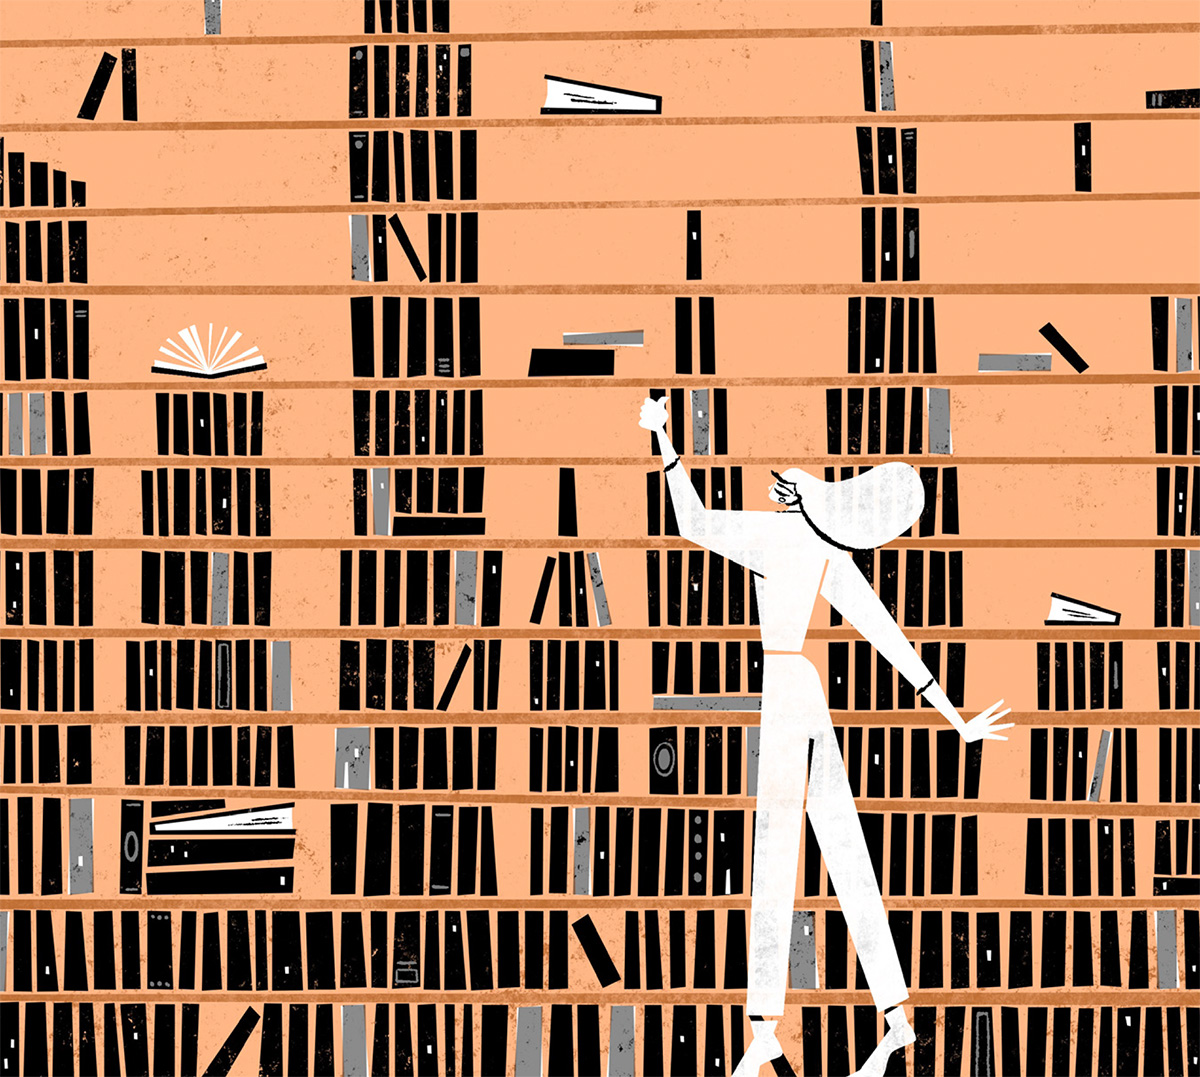 An illustration of a woman reachign for a book in front of a giant bookcase